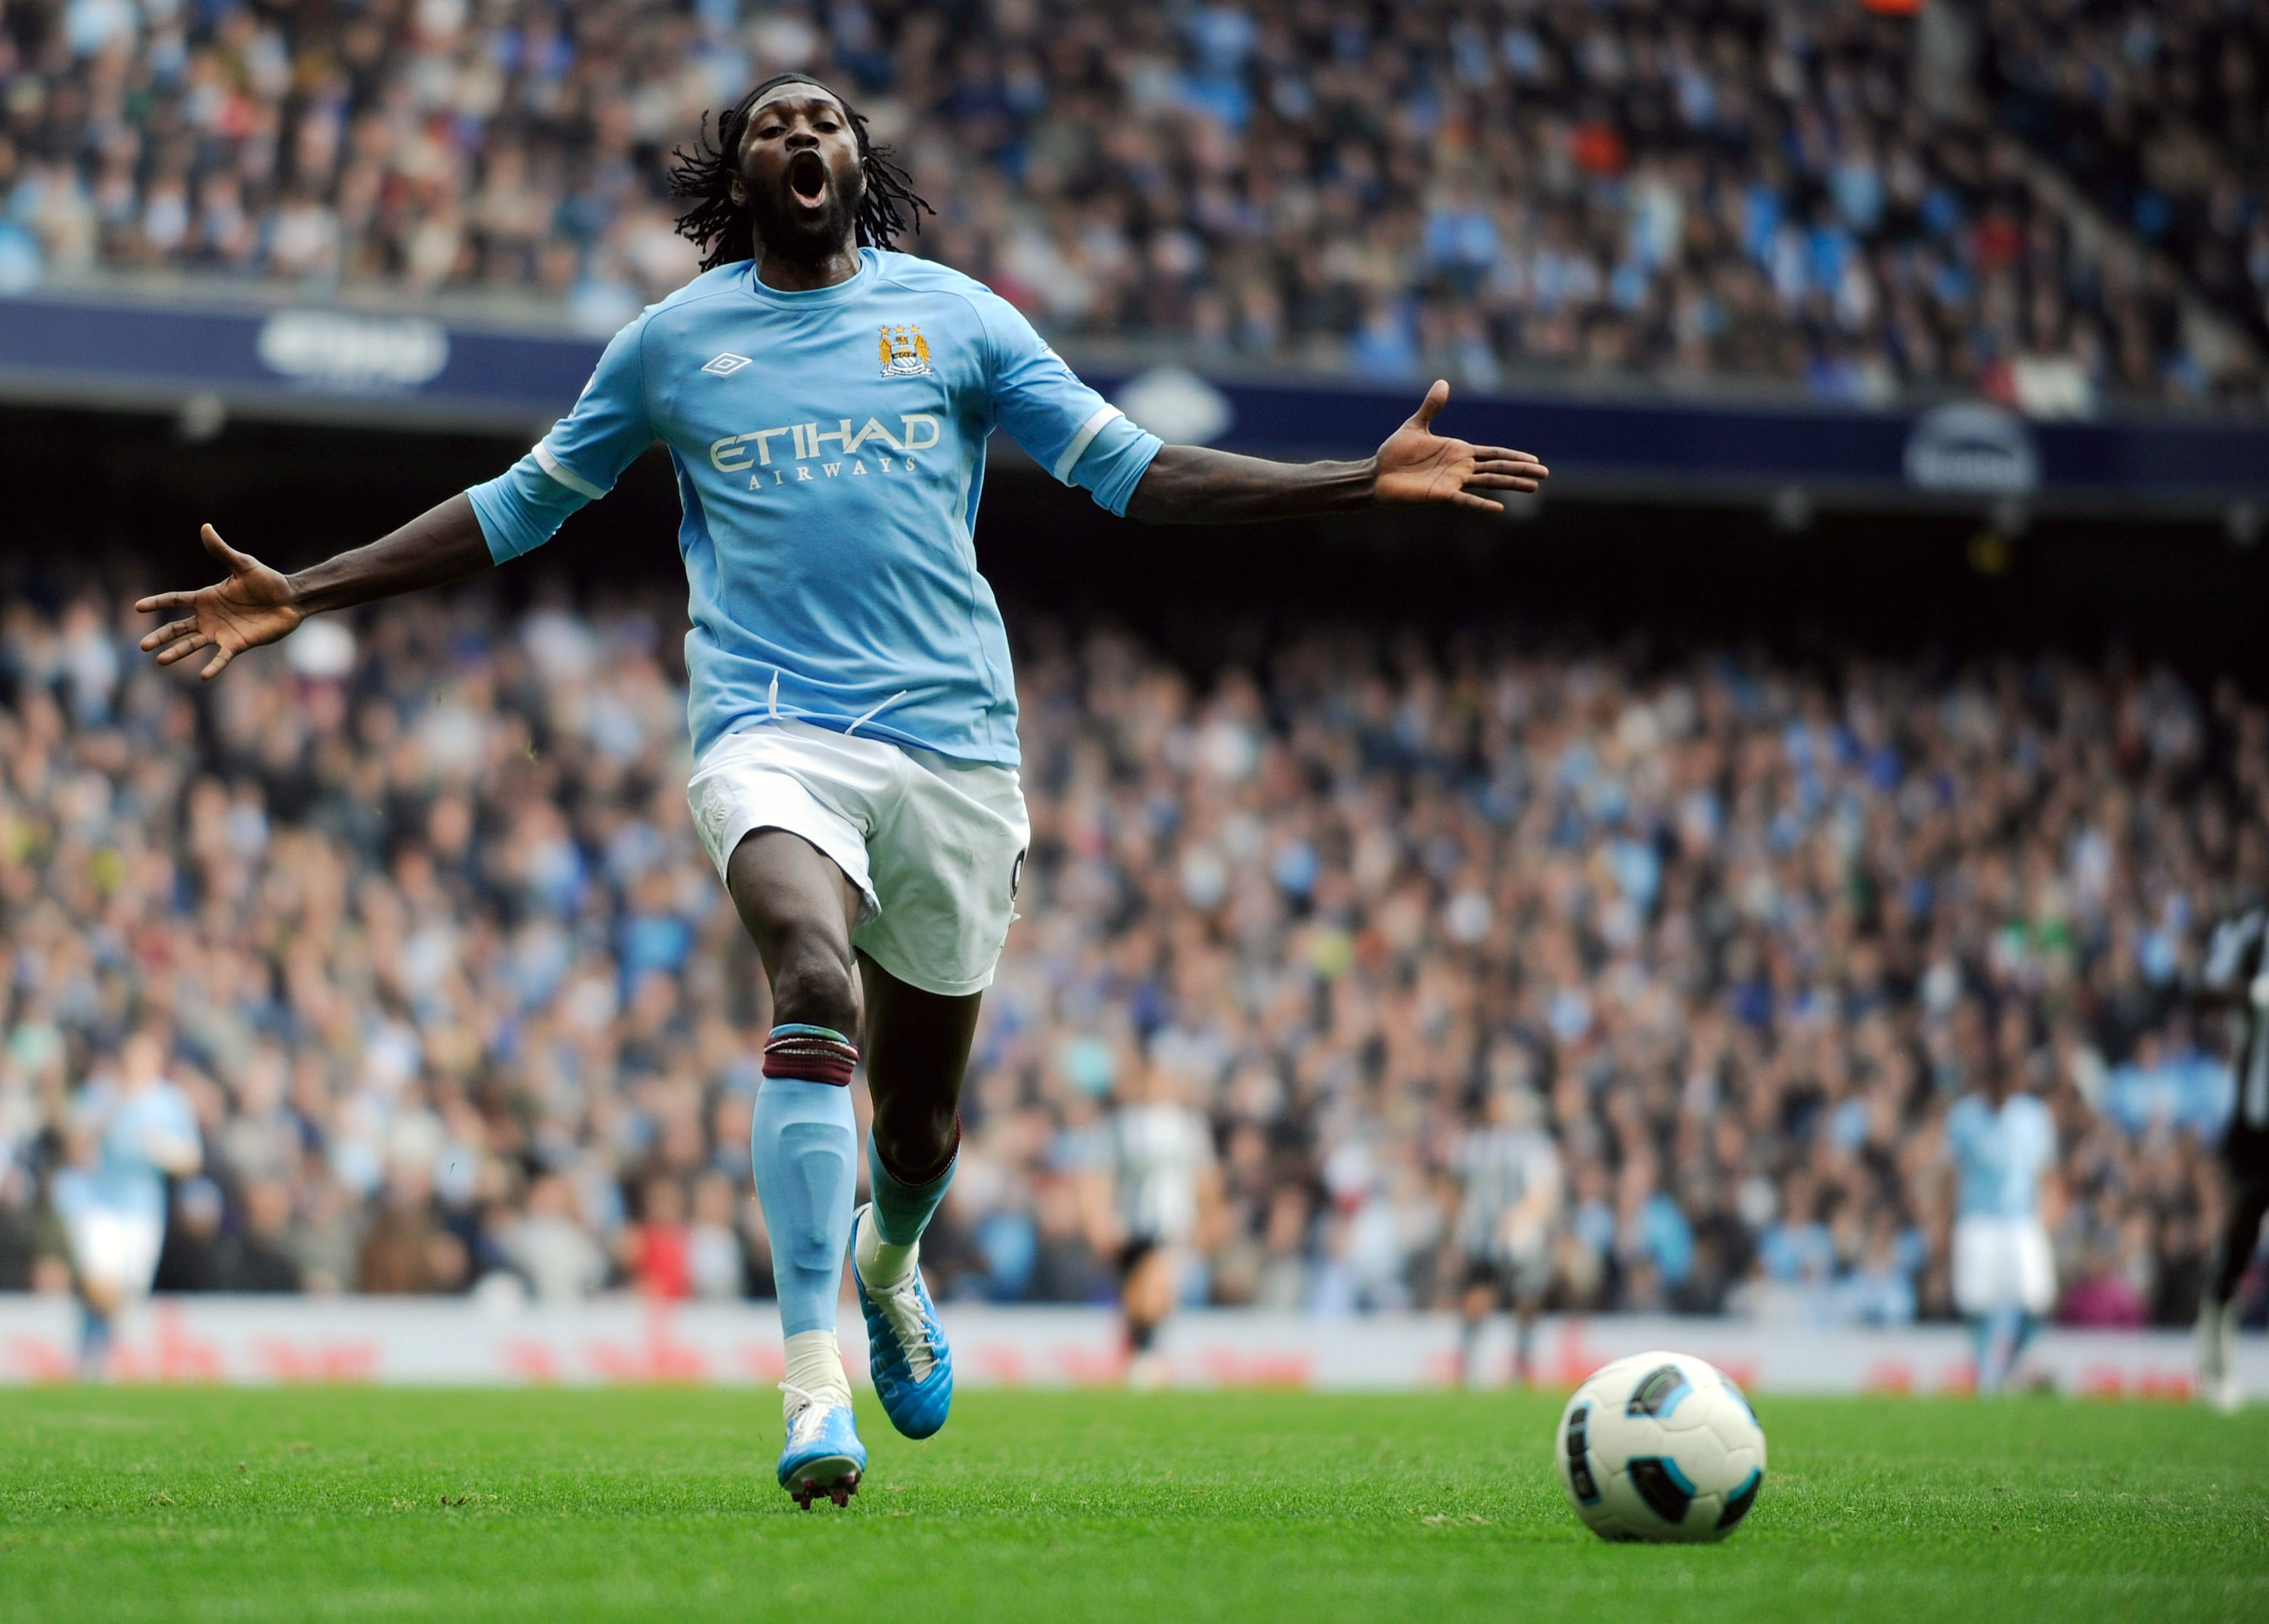 MANCHESTER, ENGLAND - OCTOBER 03: Emmanuel Adebayor of Manchester City looks frustrated after being caught offside during the Barclays Premier League match between Manchester City and Newcastle United at the City of Manchester Stadium on October 3, 2010 i